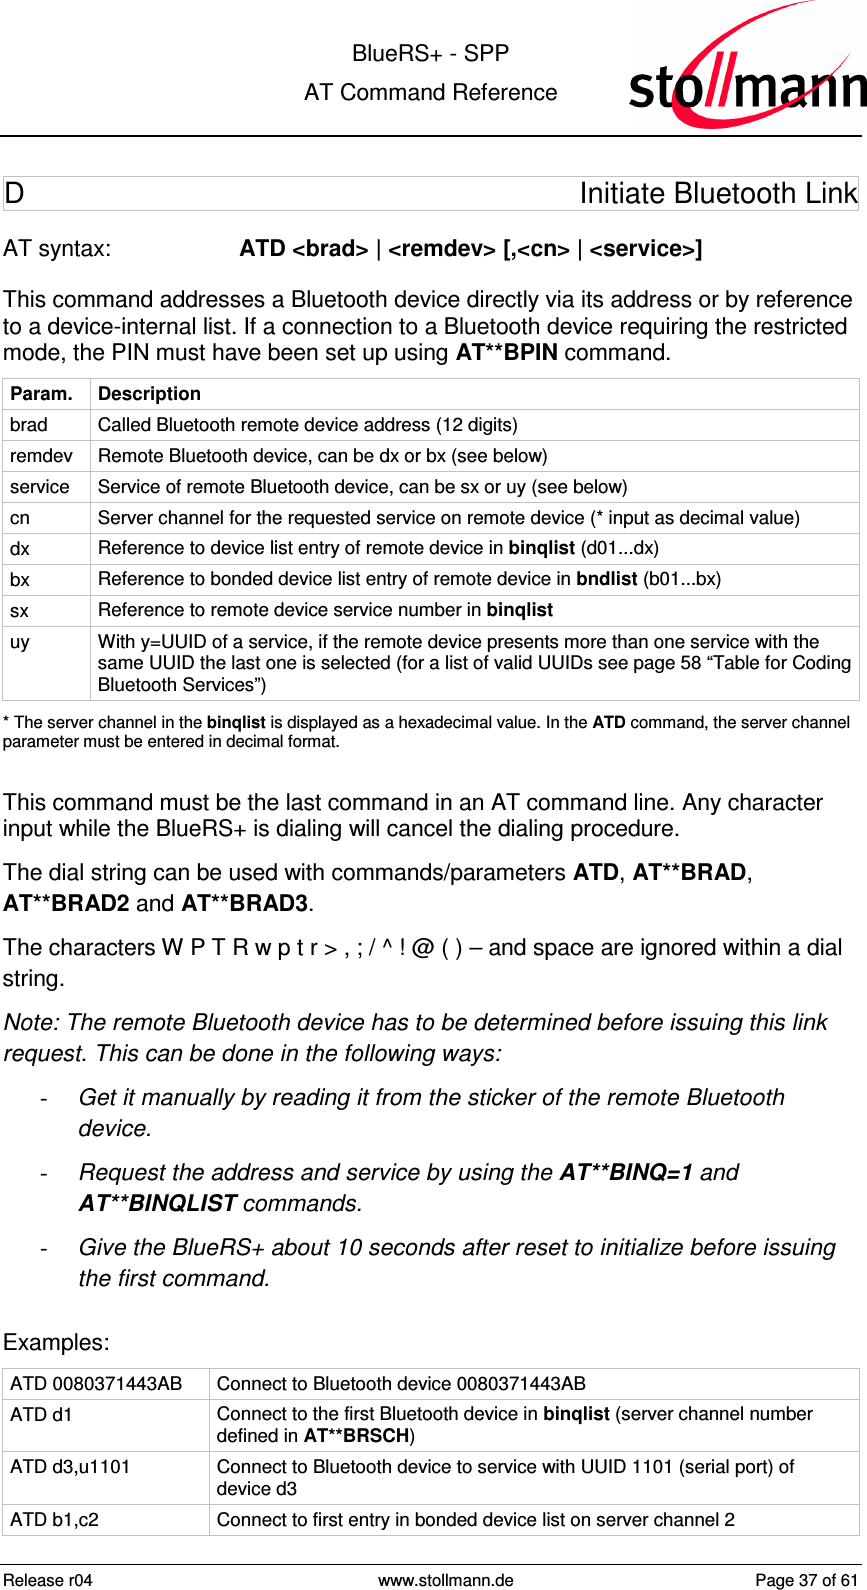  BlueRS+ - SPP AT Command Reference Release r04  www.stollmann.de  Page 37 of 61  D  Initiate Bluetooth Link  AT syntax:  ATD &lt;brad&gt; | &lt;remdev&gt; [,&lt;cn&gt; | &lt;service&gt;] This command addresses a Bluetooth device directly via its address or by reference to a device-internal list. If a connection to a Bluetooth device requiring the restricted mode, the PIN must have been set up using AT**BPIN command. Param.  Description brad  Called Bluetooth remote device address (12 digits) remdev  Remote Bluetooth device, can be dx or bx (see below) service  Service of remote Bluetooth device, can be sx or uy (see below) cn  Server channel for the requested service on remote device (* input as decimal value) dx  Reference to device list entry of remote device in binqlist (d01...dx) bx  Reference to bonded device list entry of remote device in bndlist (b01...bx) sx  Reference to remote device service number in binqlist uy  With y=UUID of a service, if the remote device presents more than one service with the same UUID the last one is selected (for a list of valid UUIDs see page 58 “Table for Coding Bluetooth Services”) * The server channel in the binqlist is displayed as a hexadecimal value. In the ATD command, the server channel parameter must be entered in decimal format.  This command must be the last command in an AT command line. Any character input while the BlueRS+ is dialing will cancel the dialing procedure. The dial string can be used with commands/parameters ATD, AT**BRAD, AT**BRAD2 and AT**BRAD3. The characters W P T R w p t r &gt; , ; / ^ ! @ ( ) – and space are ignored within a dial string. Note: The remote Bluetooth device has to be determined before issuing this link request. This can be done in the following ways: -  Get it manually by reading it from the sticker of the remote Bluetooth device. -  Request the address and service by using the AT**BINQ=1 and AT**BINQLIST commands. -  Give the BlueRS+ about 10 seconds after reset to initialize before issuing the first command. Examples: ATD 0080371443AB  Connect to Bluetooth device 0080371443AB ATD d1  Connect to the first Bluetooth device in binqlist (server channel number defined in AT**BRSCH) ATD d3,u1101  Connect to Bluetooth device to service with UUID 1101 (serial port) of device d3 ATD b1,c2  Connect to first entry in bonded device list on server channel 2 